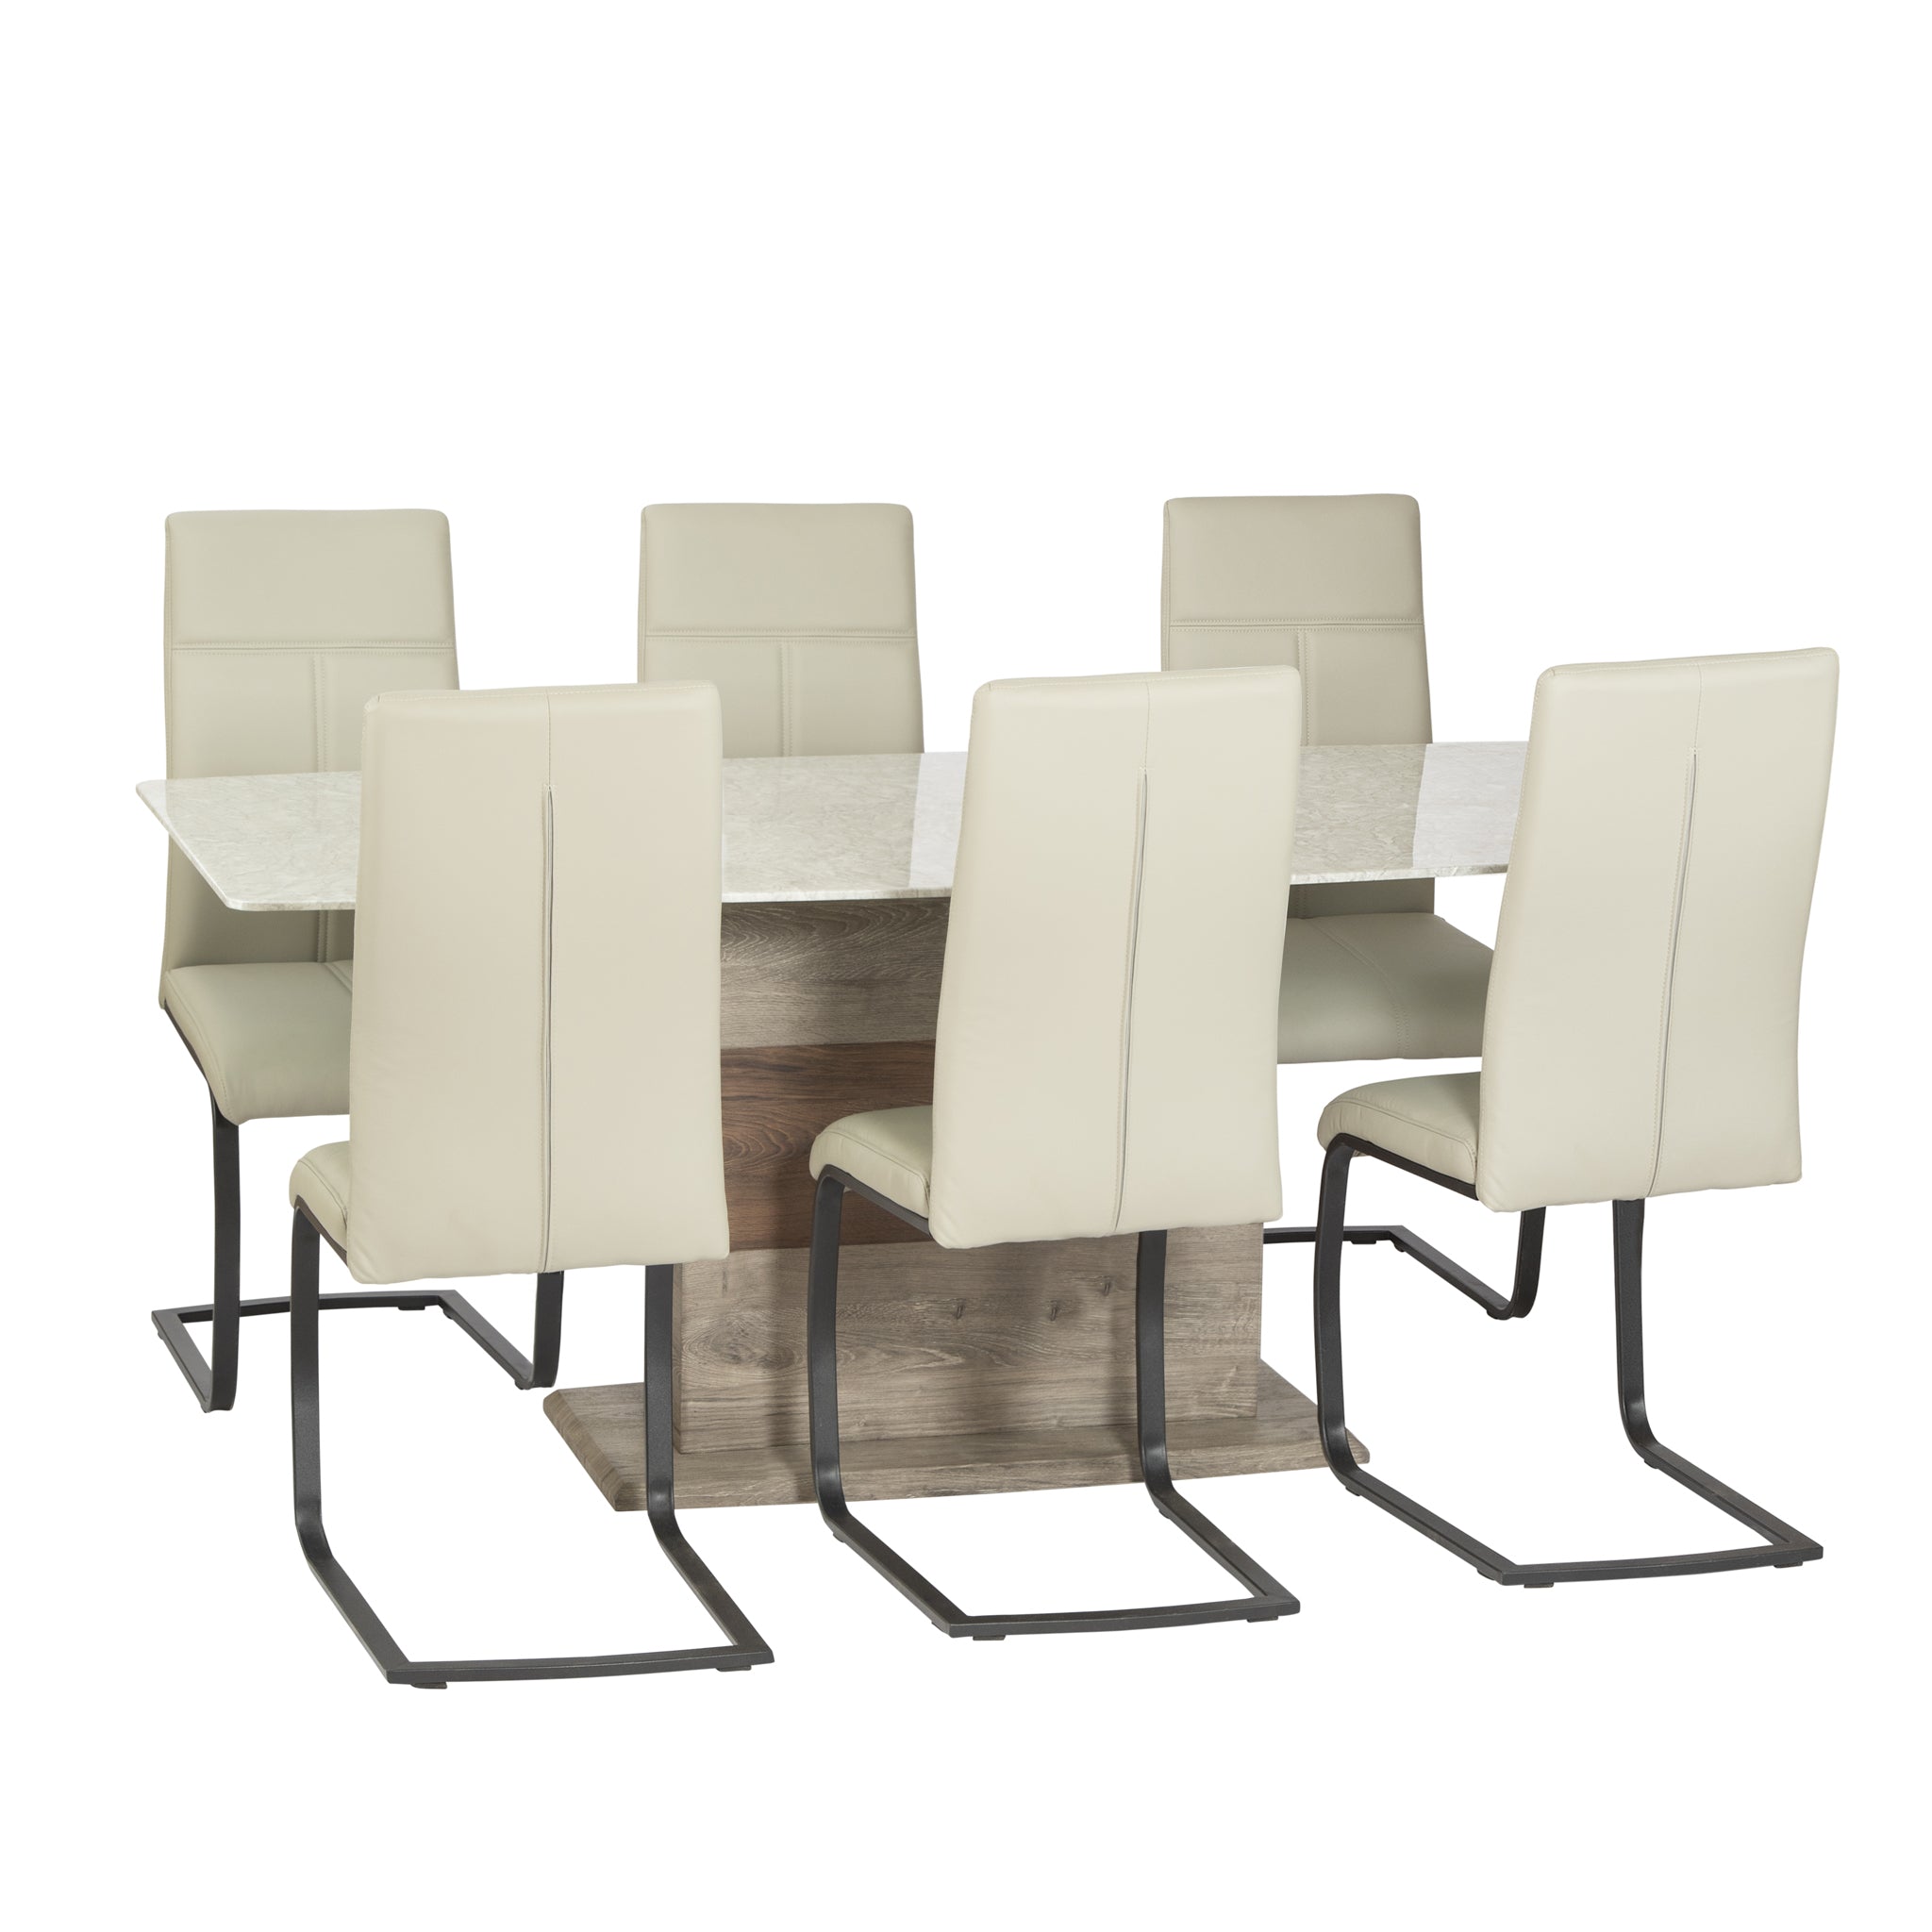 Contemporary Marble Effect Dining Table & 6 Chairs Set - White